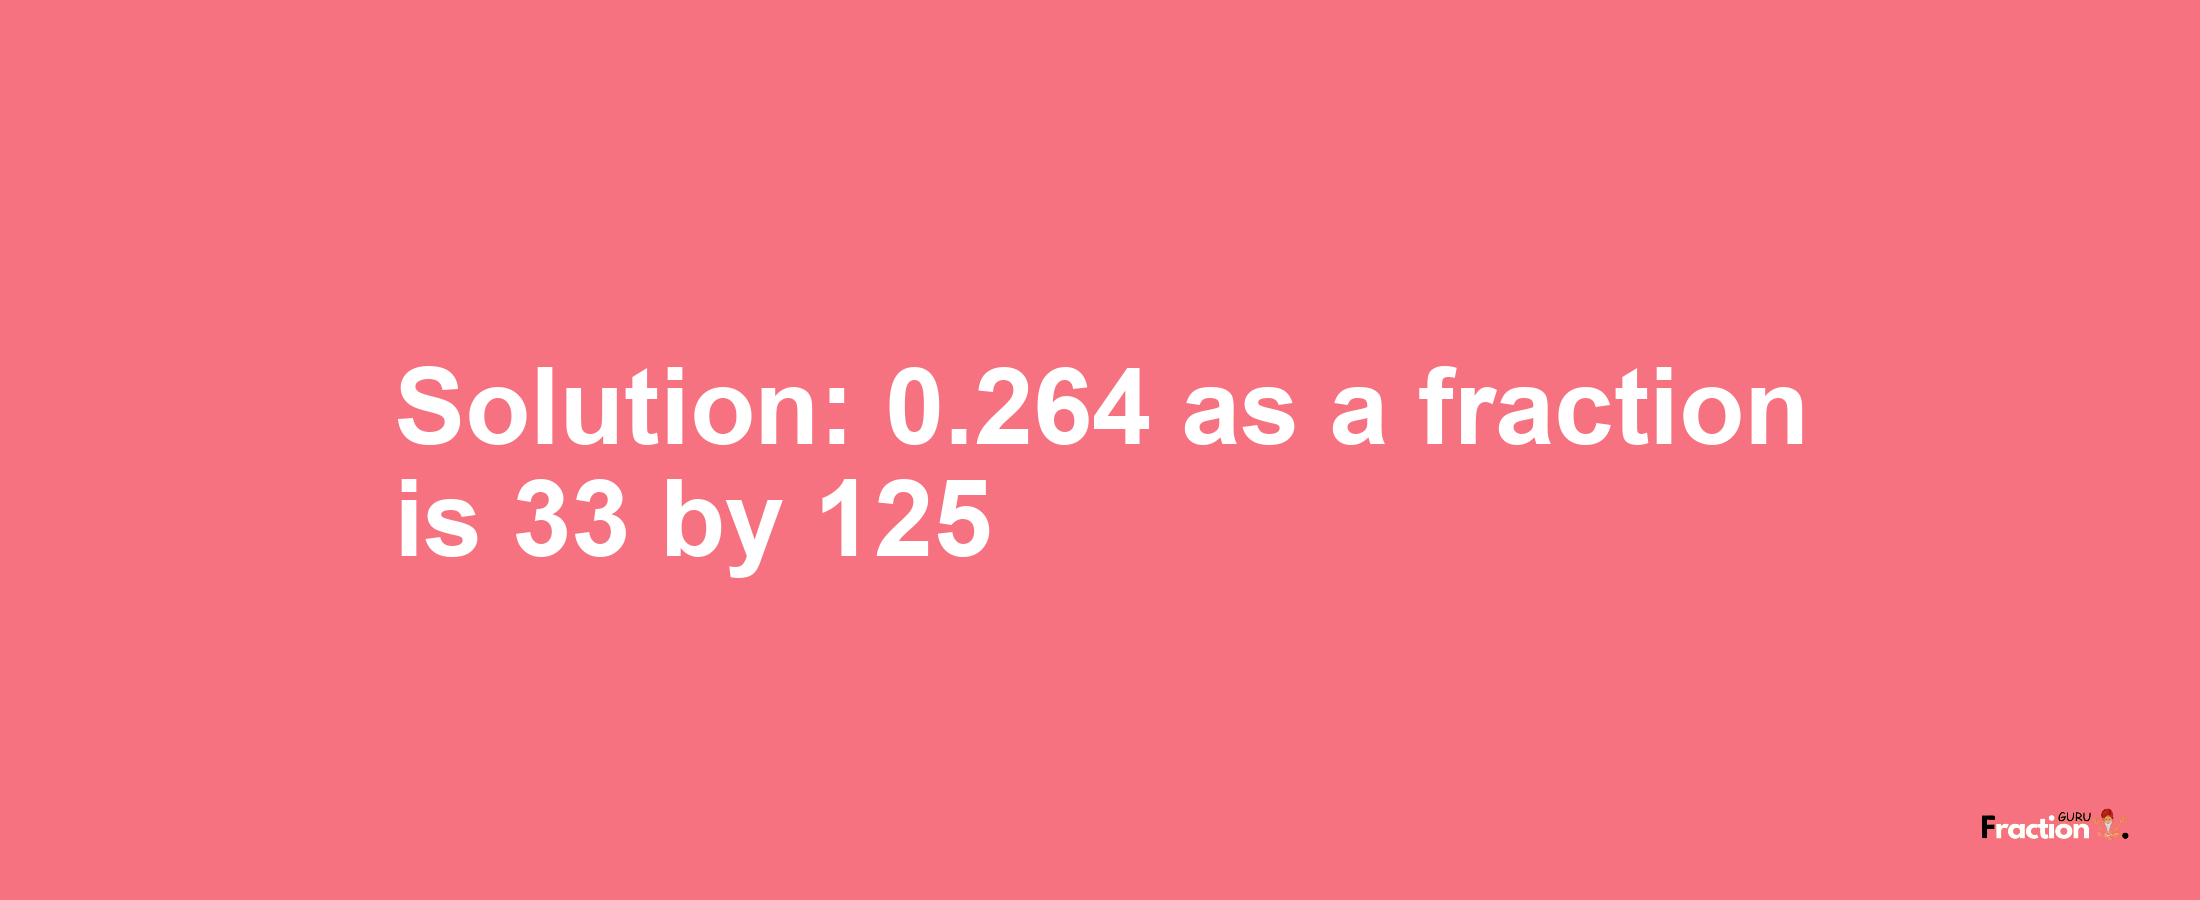 Solution:0.264 as a fraction is 33/125